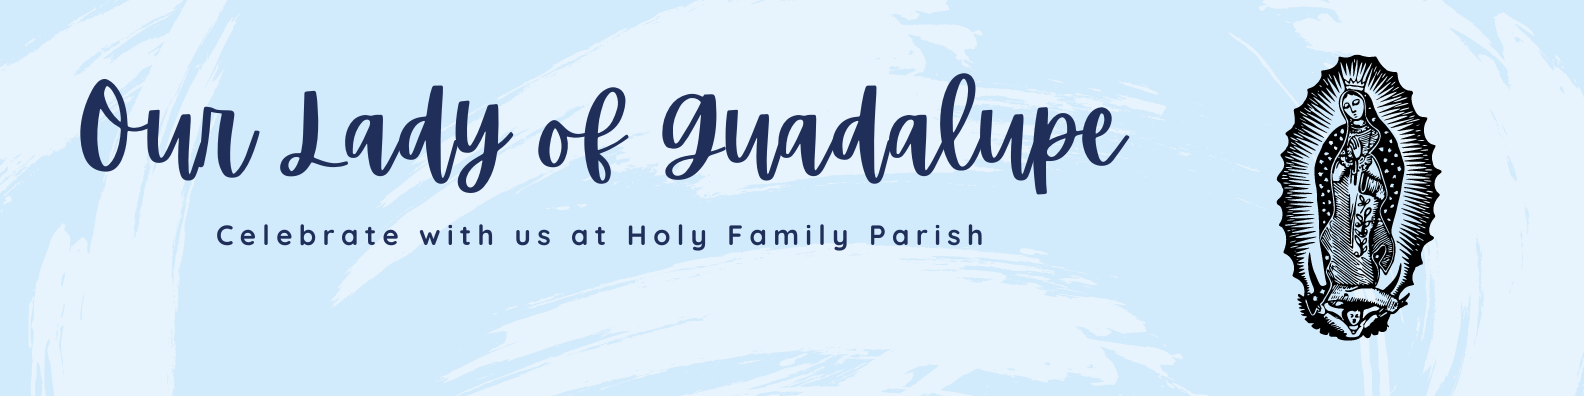 Our Lady of Guadalupe Mass (English) @ St. Ladislaus Church